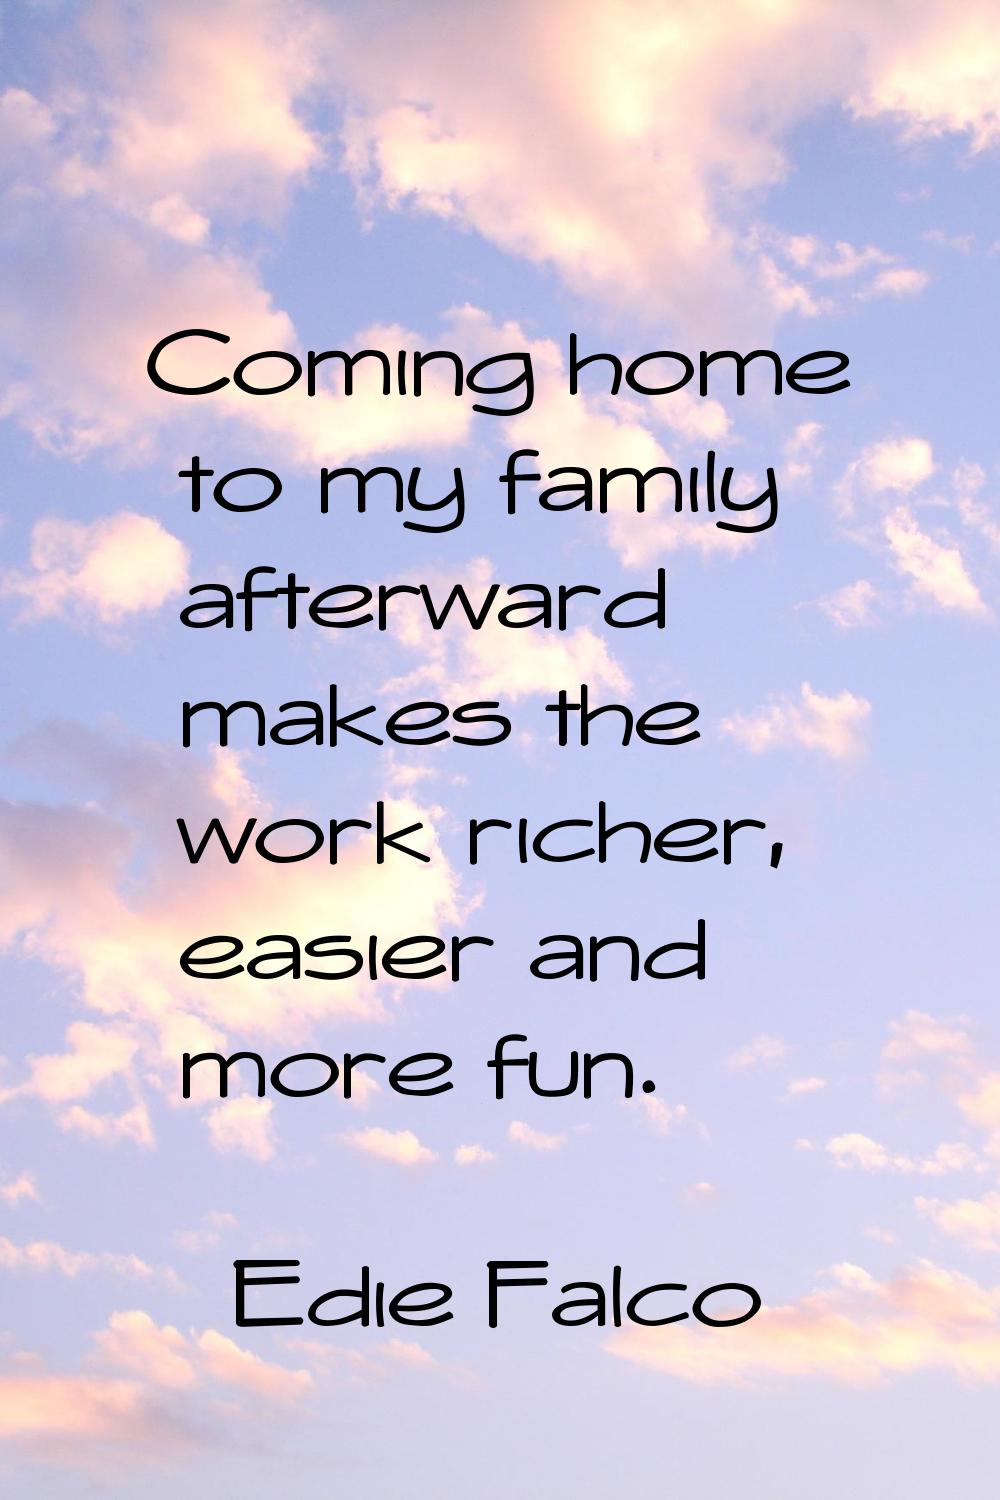 Coming home to my family afterward makes the work richer, easier and more fun.